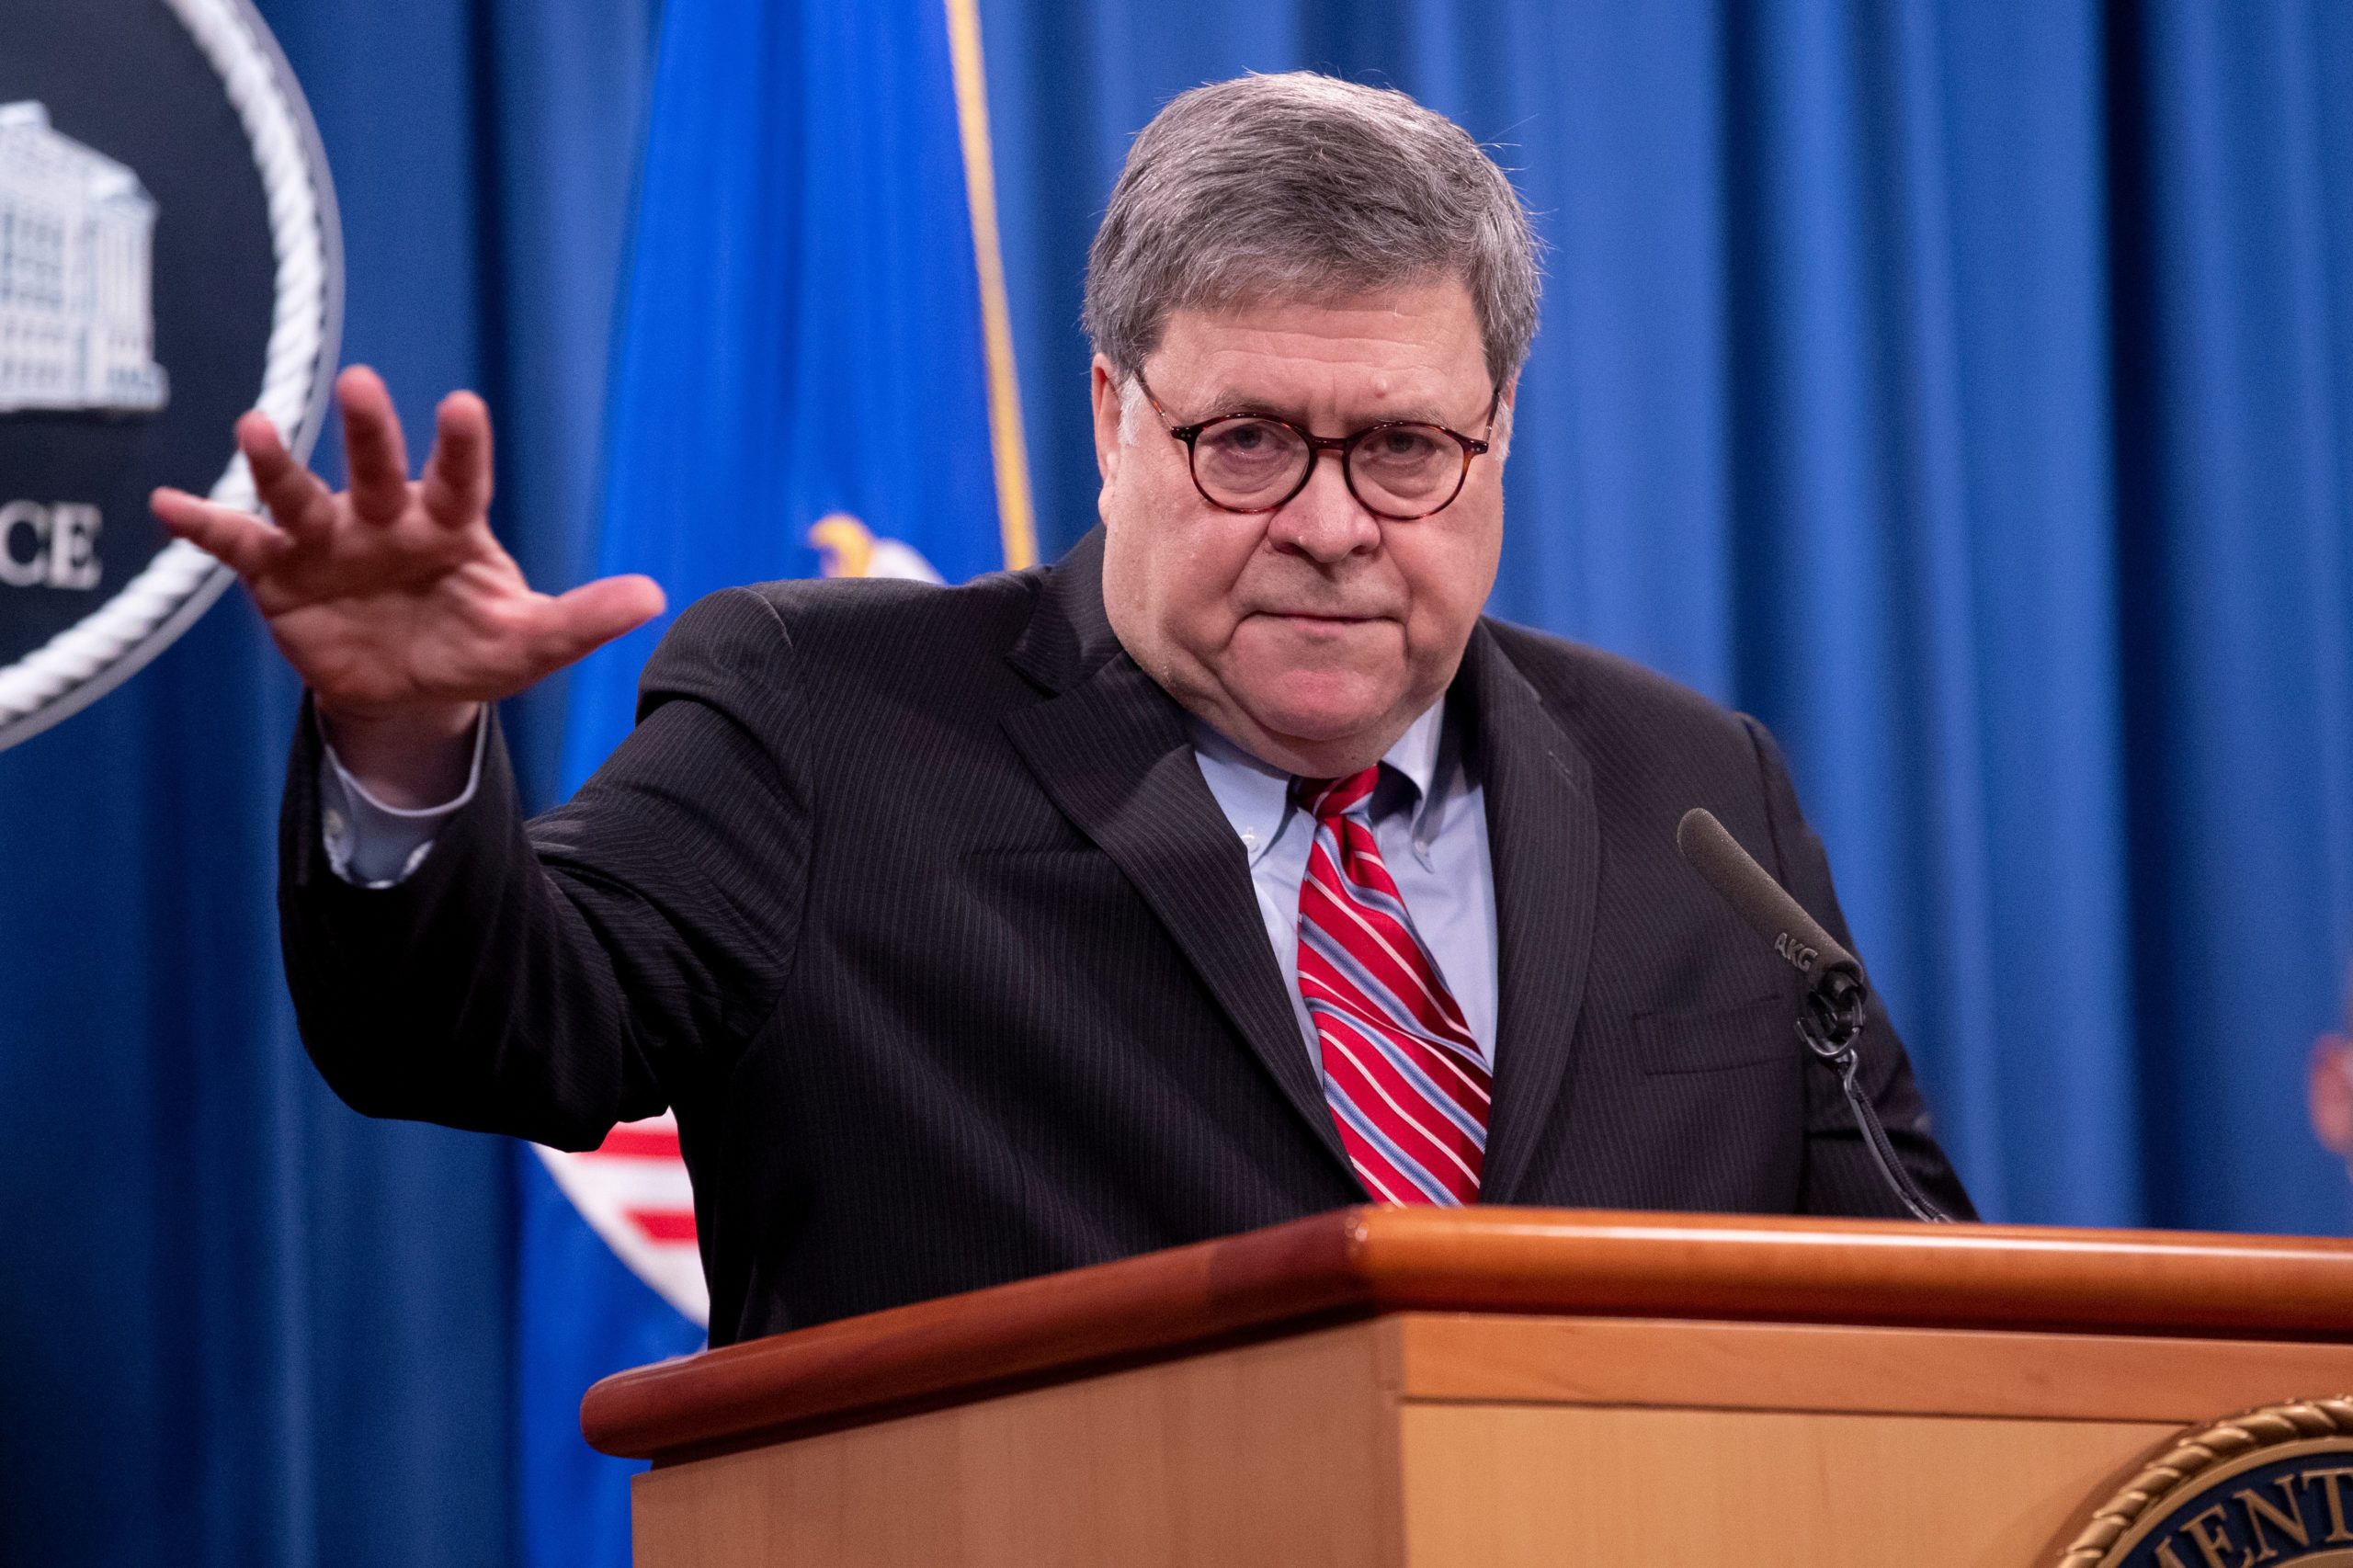 US Attorney General William Barr speaks during a news conference at the US Department of Justice in Washington, DC, on December 21, 2020. (MICHAEL REYNOLDS/POOL/AFP via Getty Images)